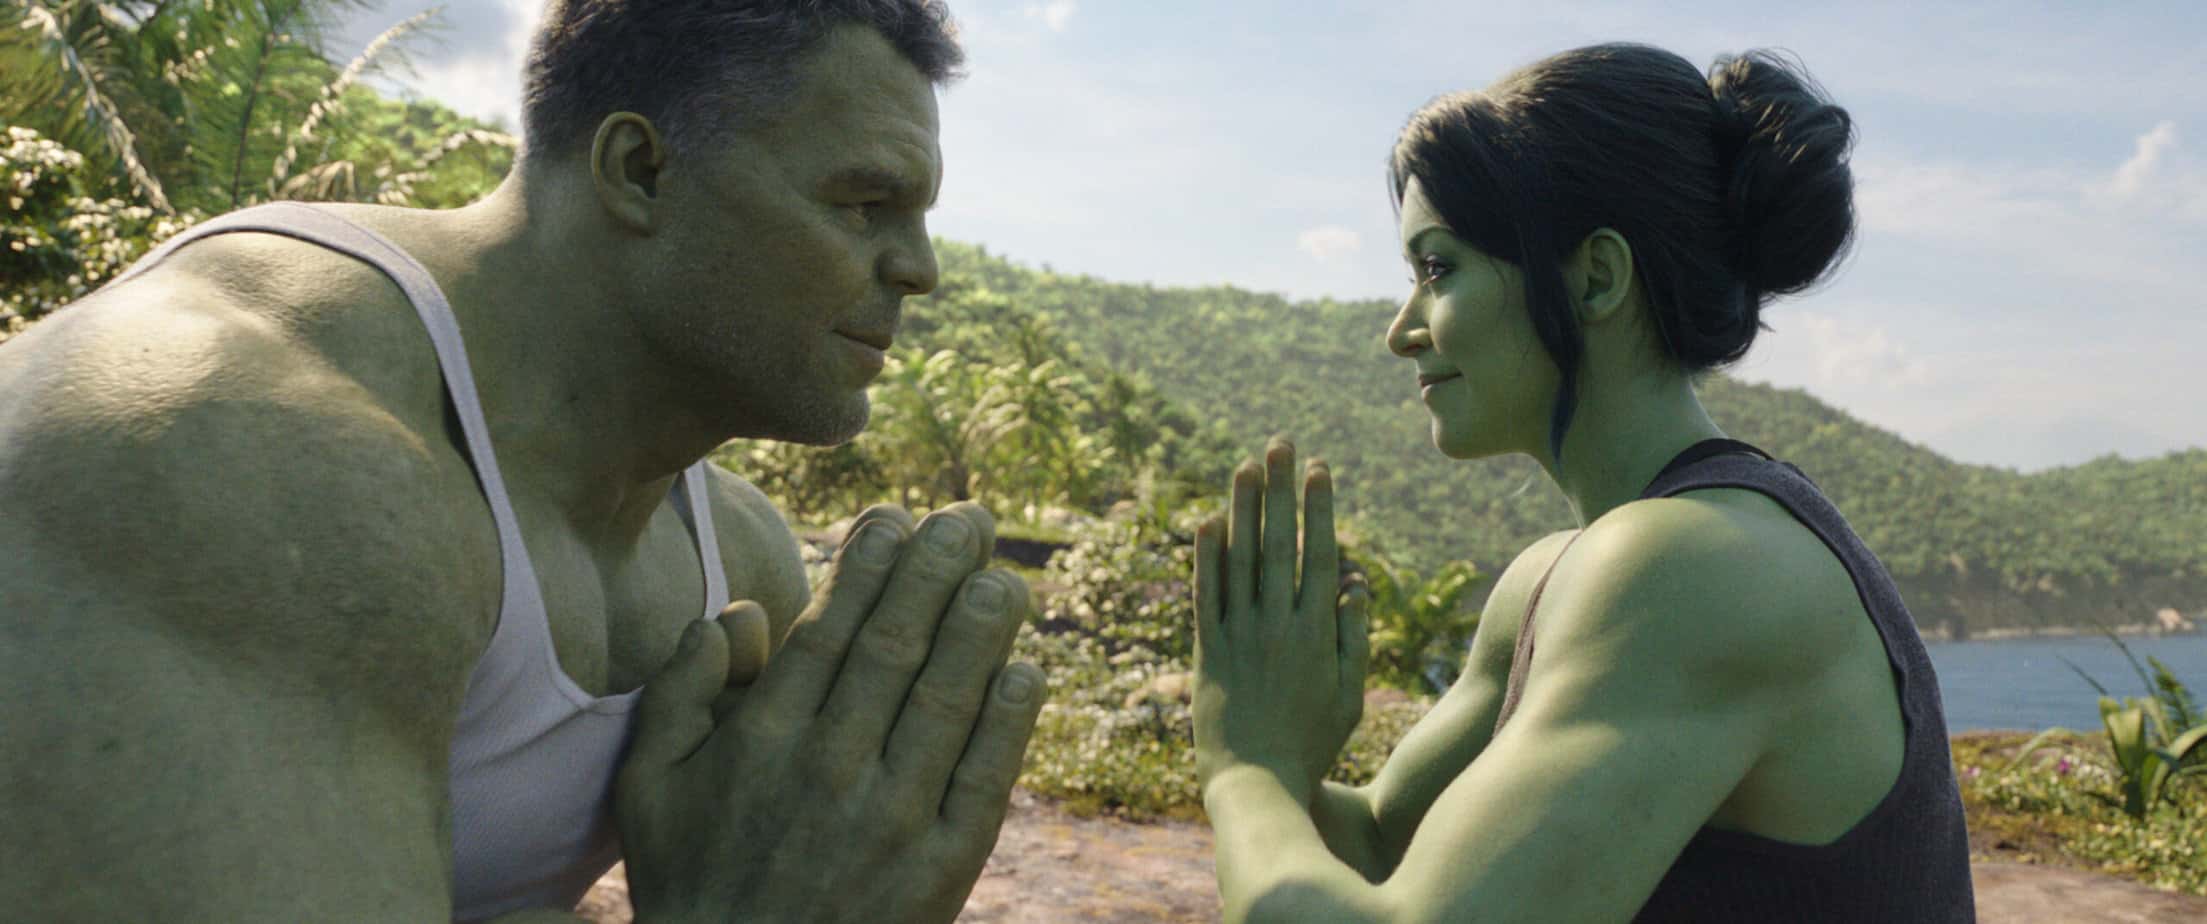 what is the age rating of she hulk? parents guide and review. hulk and she hulk doing yoga on an island.